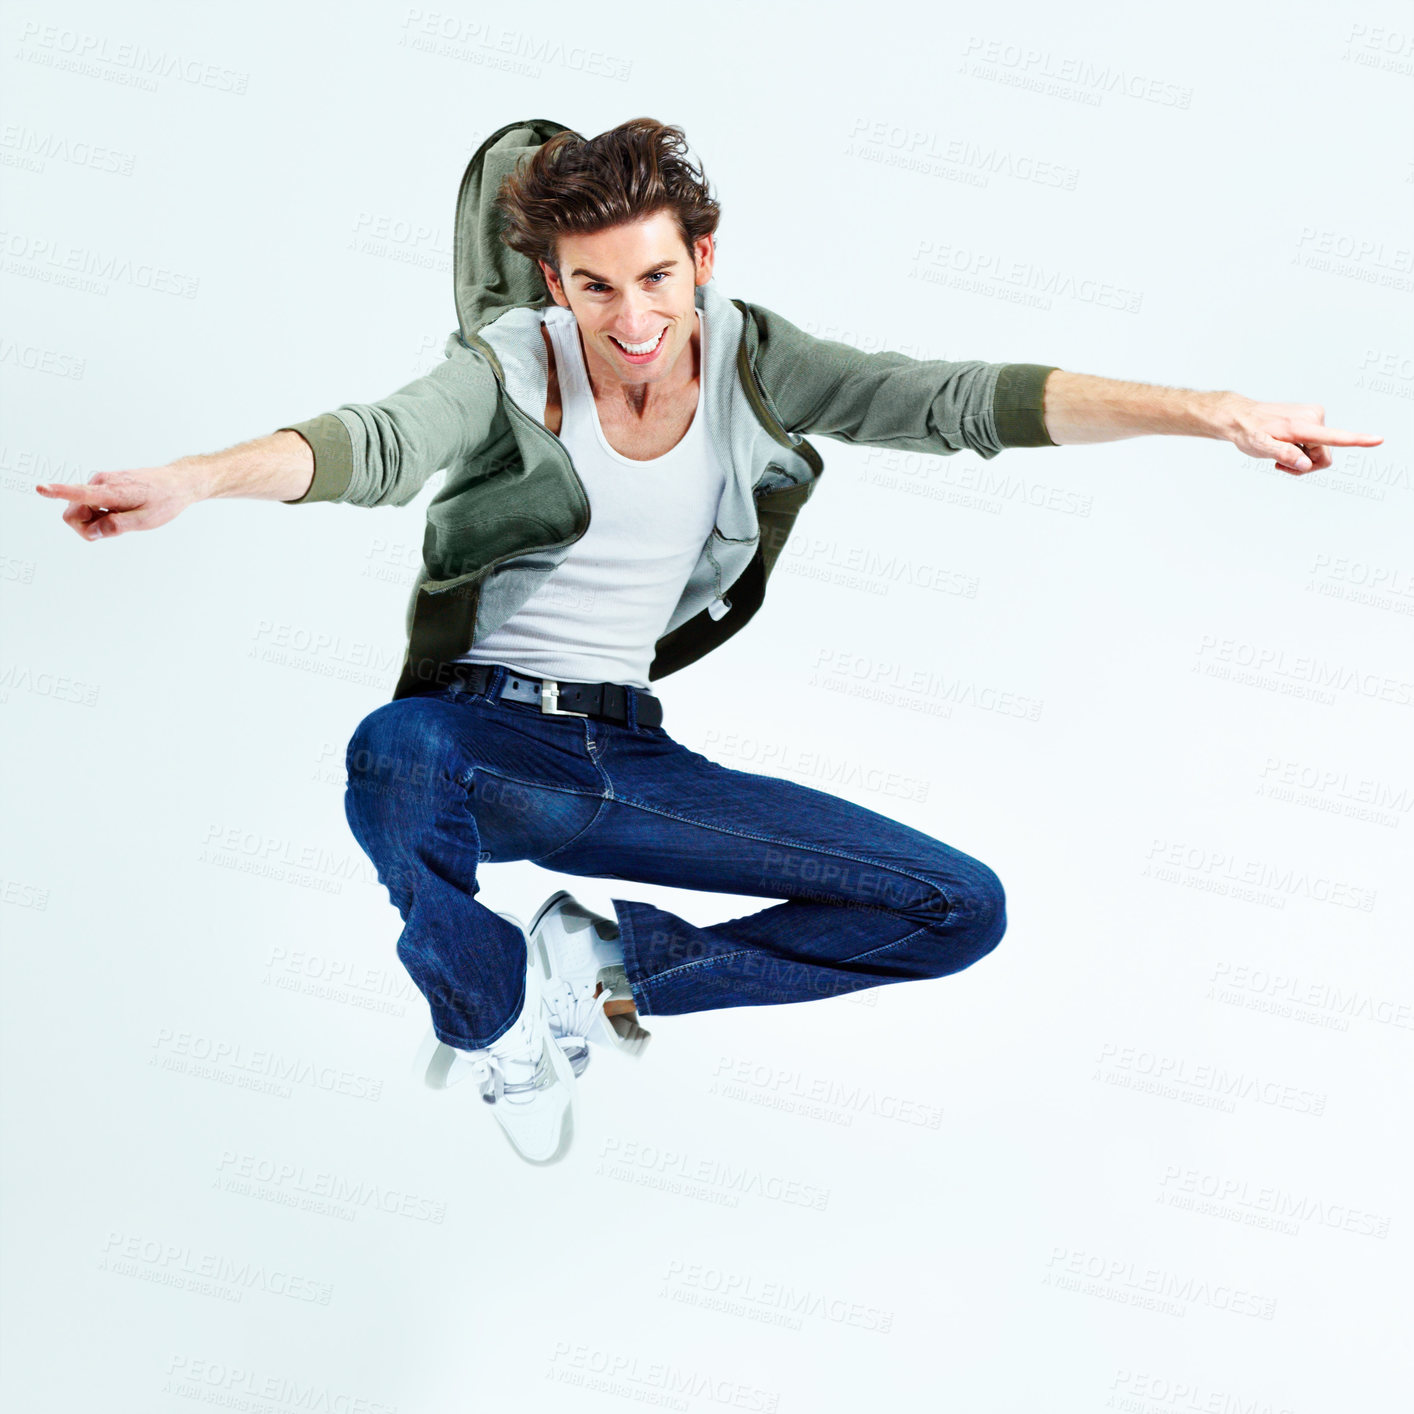 Buy stock photo Portrait of a young man leaping up and posing while in the air